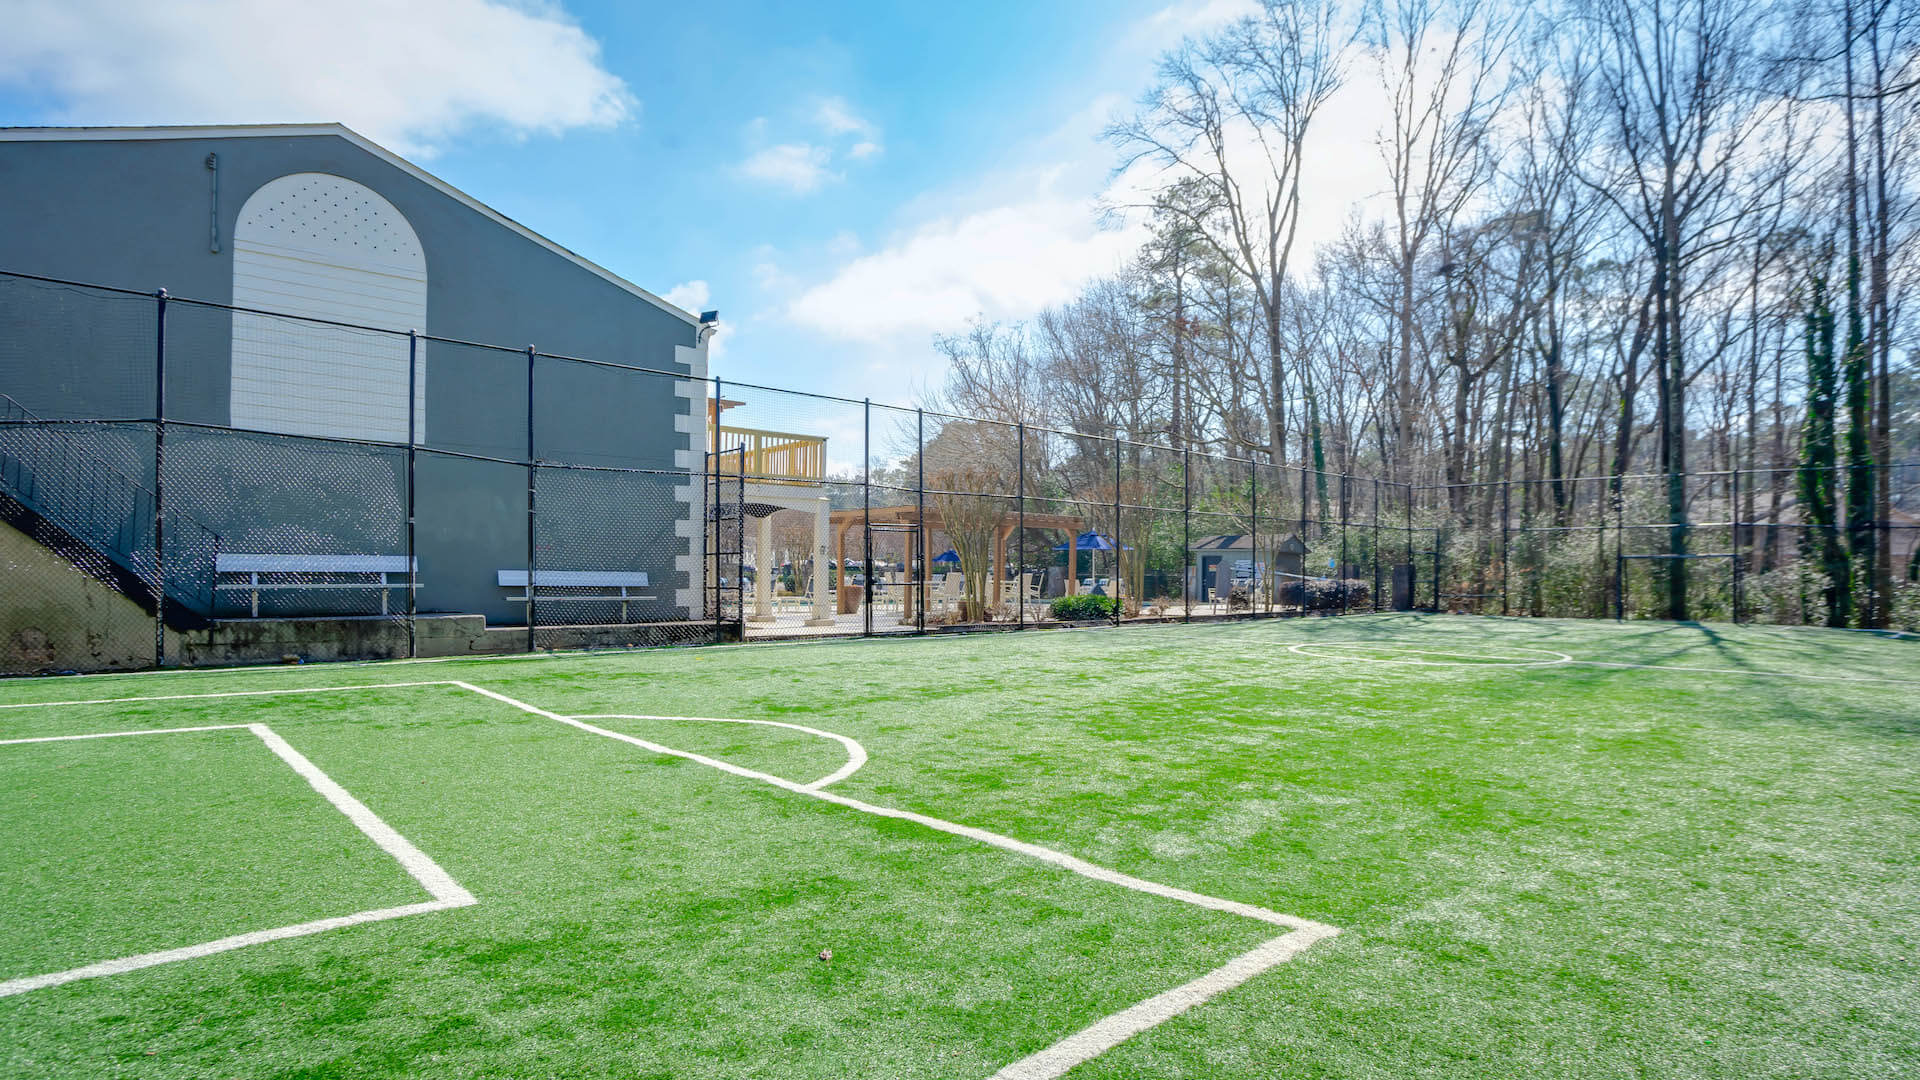 Astroturf soccer field and pool